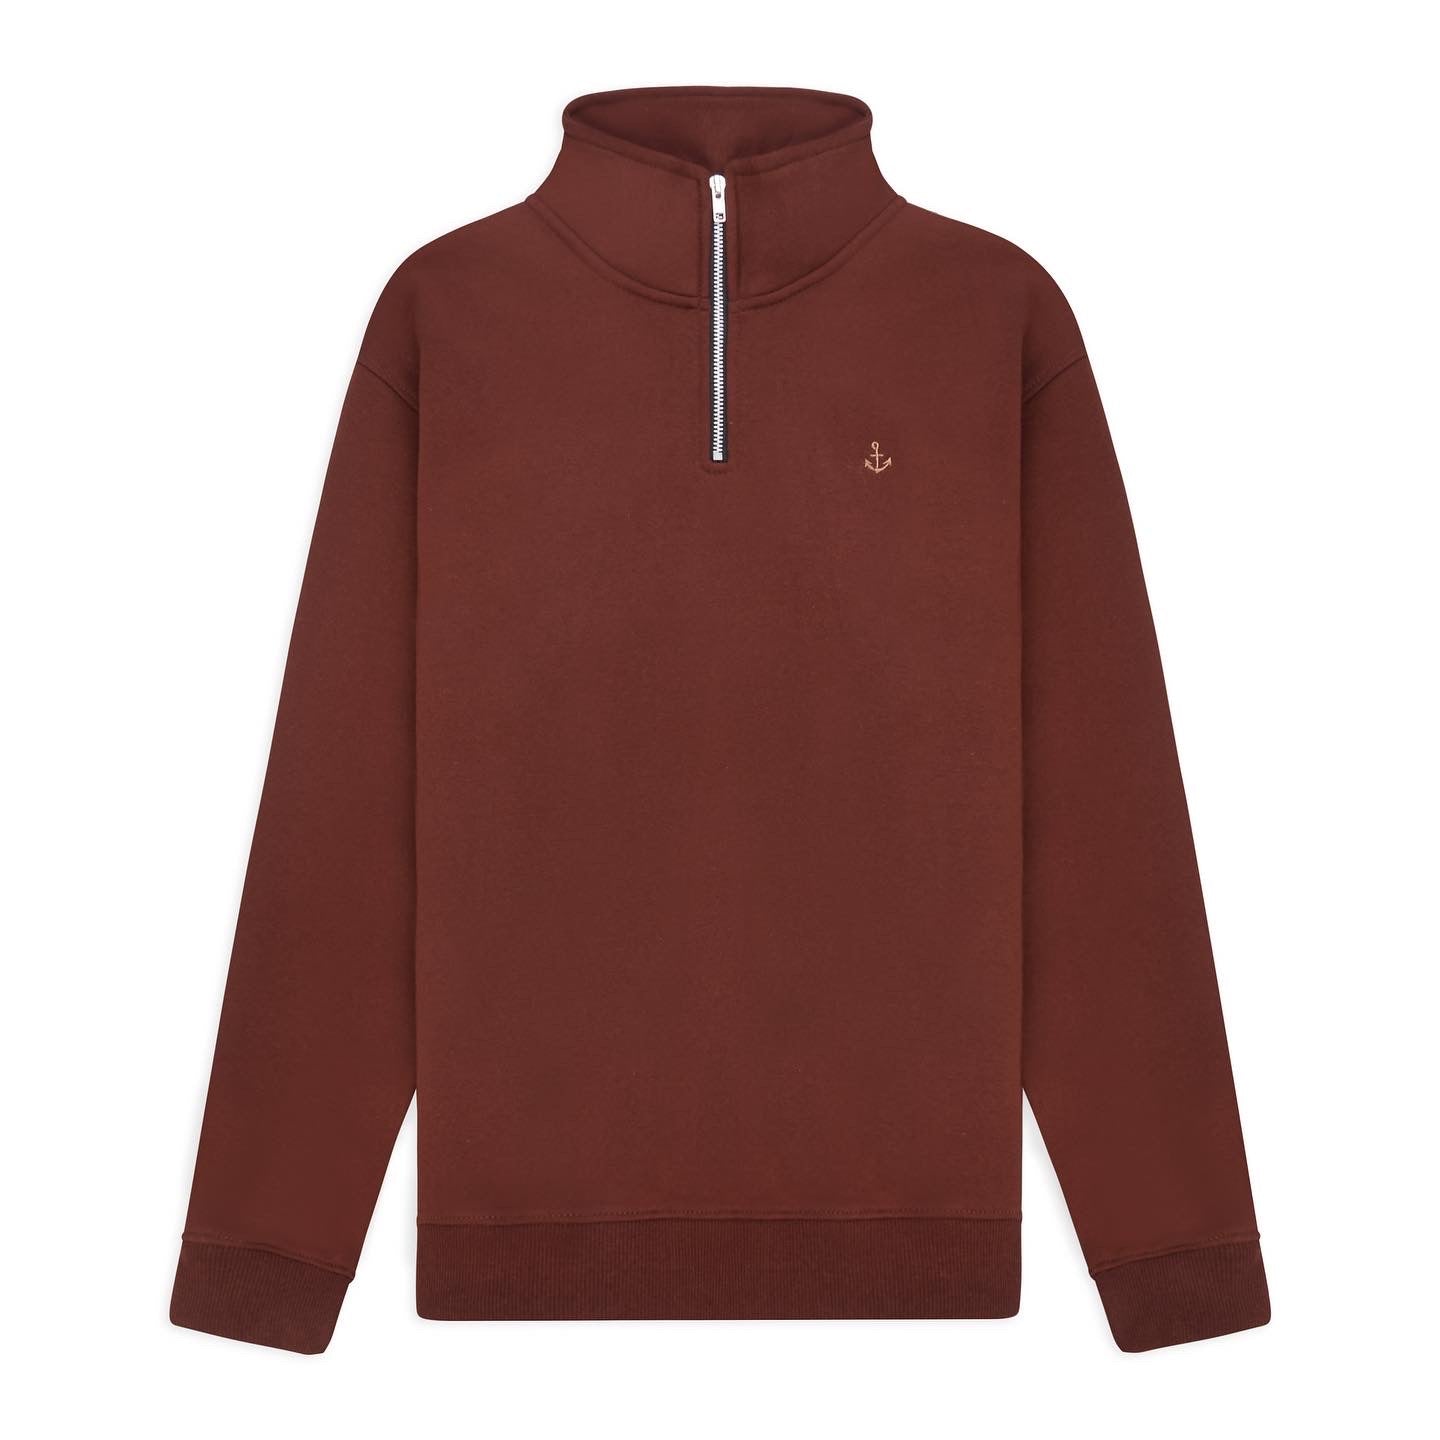 FORCE 10 OFFICIAL ⚓️ COUNTRY BROWN PORT SIDE 1/4 ZIP